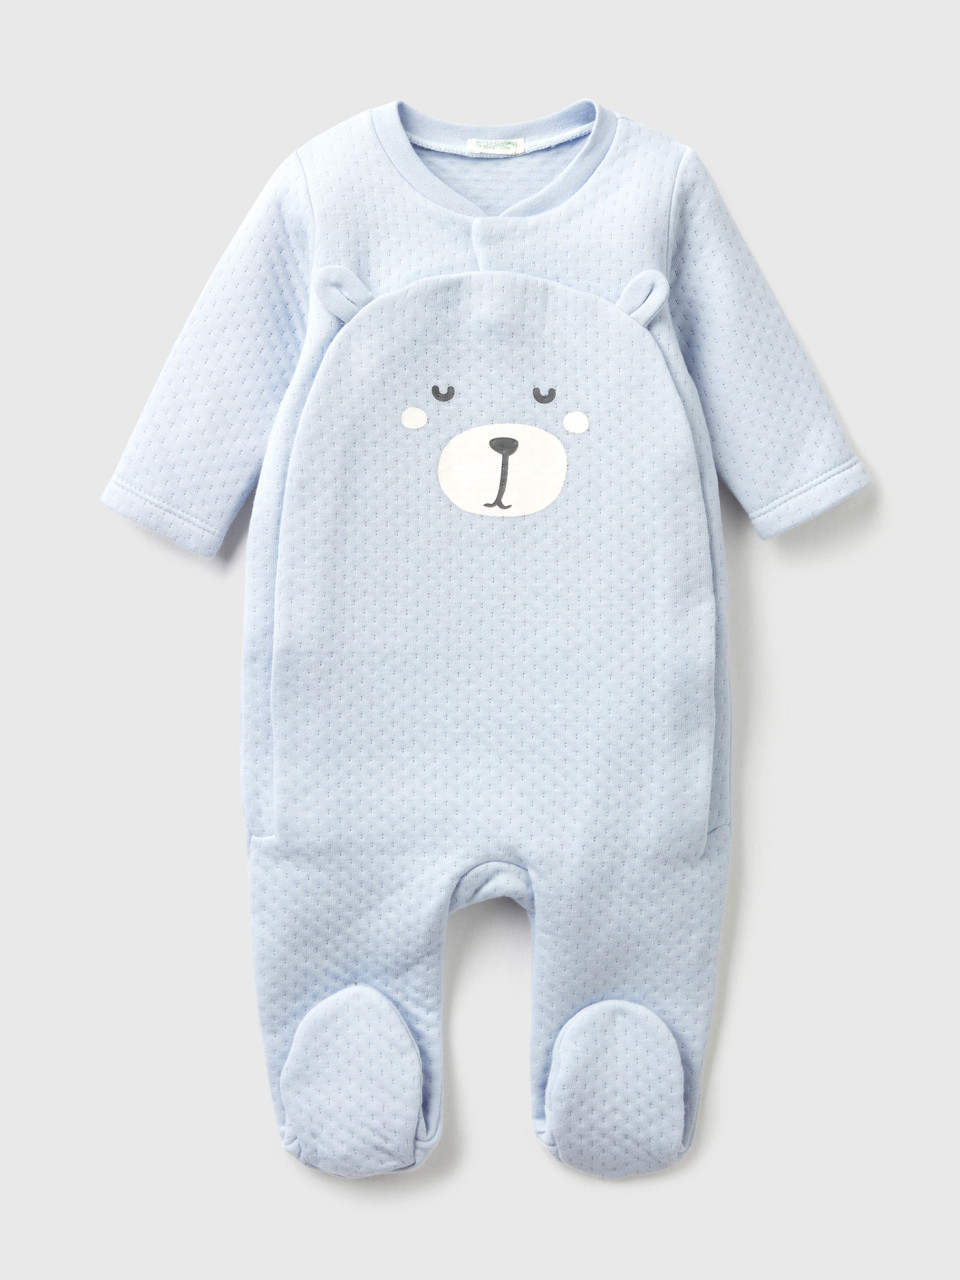 Benetton, Teddy Bear Onesie With Quilted Look, Sky Blue, Kids